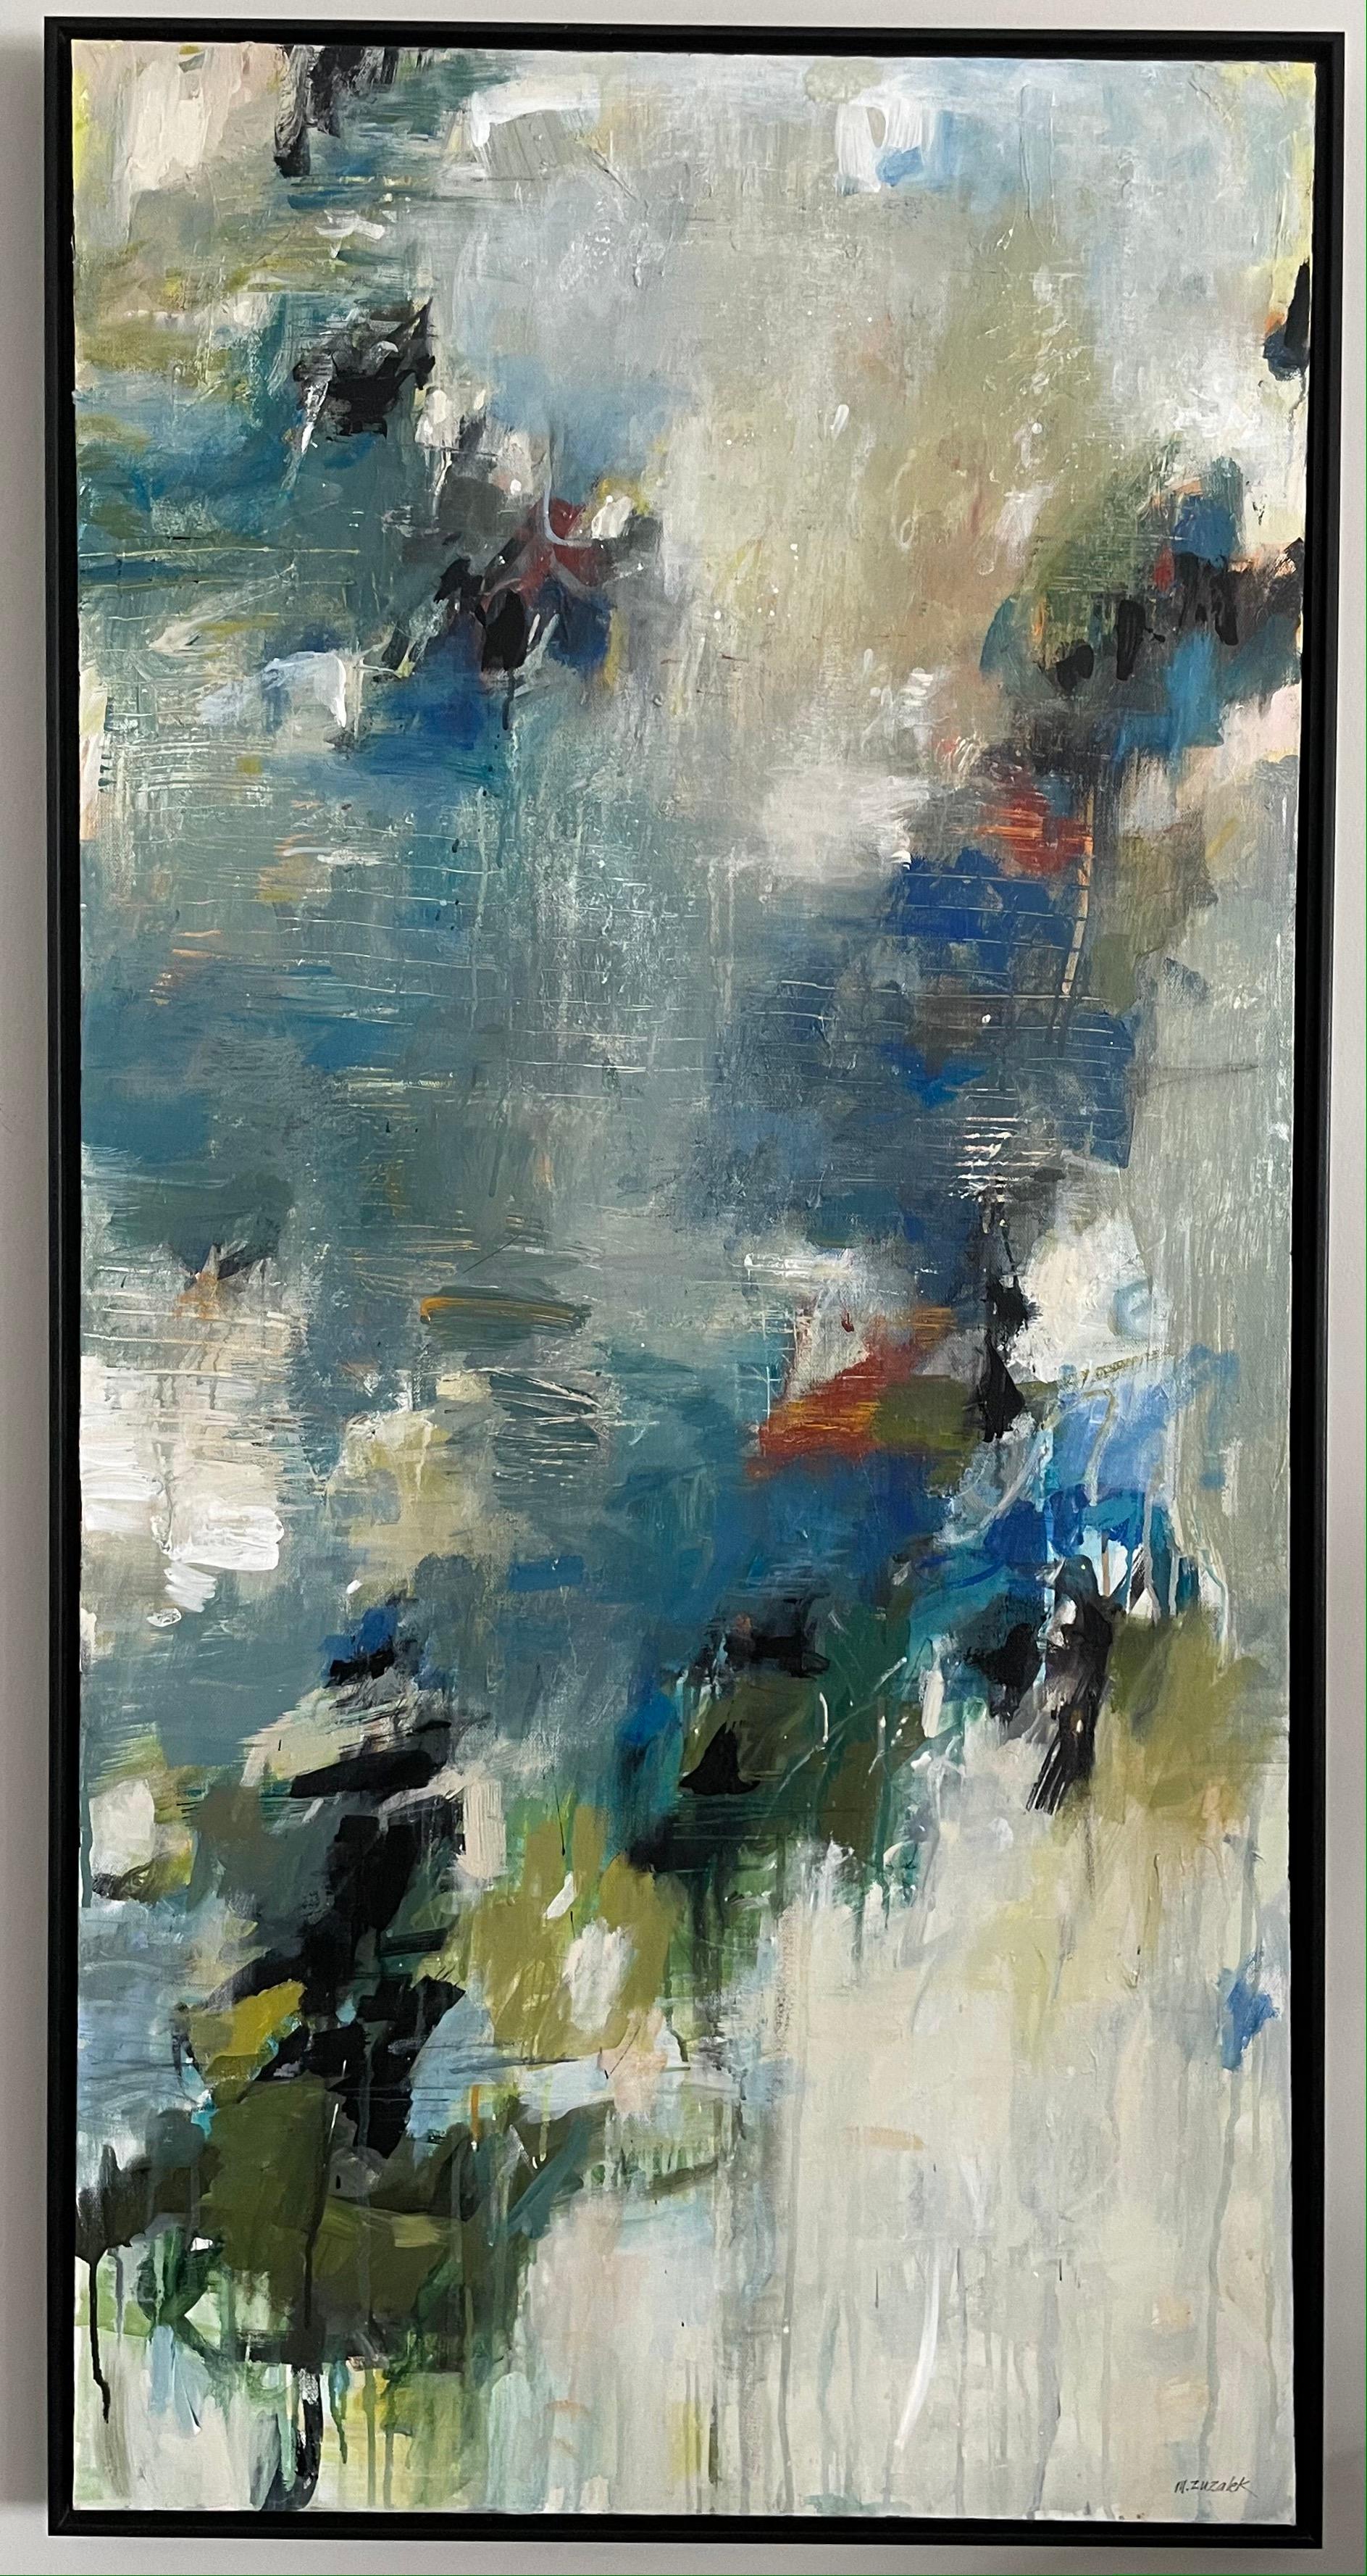 Large original modern abstract landscape painting titled "Ambedo"
This original mixed media painting features acrylics, ink, and oil pastel on canvas.
It embodies how we can become completely absorbed in the beauty of being alive. The soft neutrals